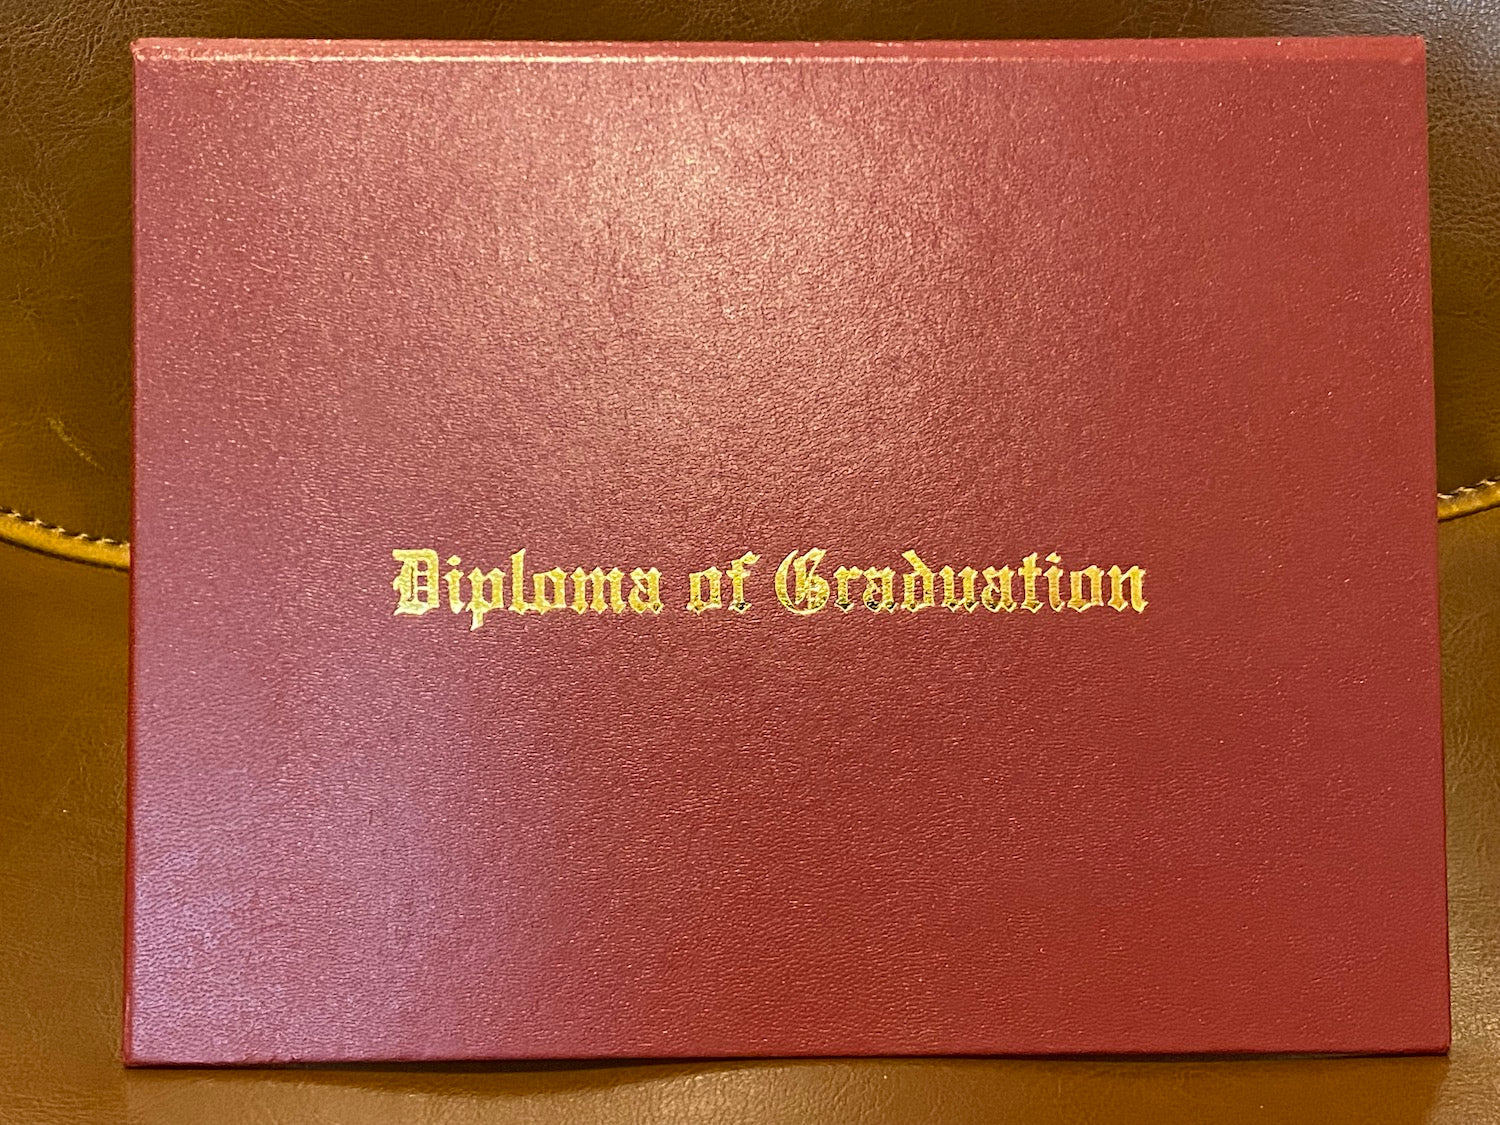 I received my diploma today but there was no cover for it, just the paper.  Is there any way I can get a cover? It only came with a list of frames